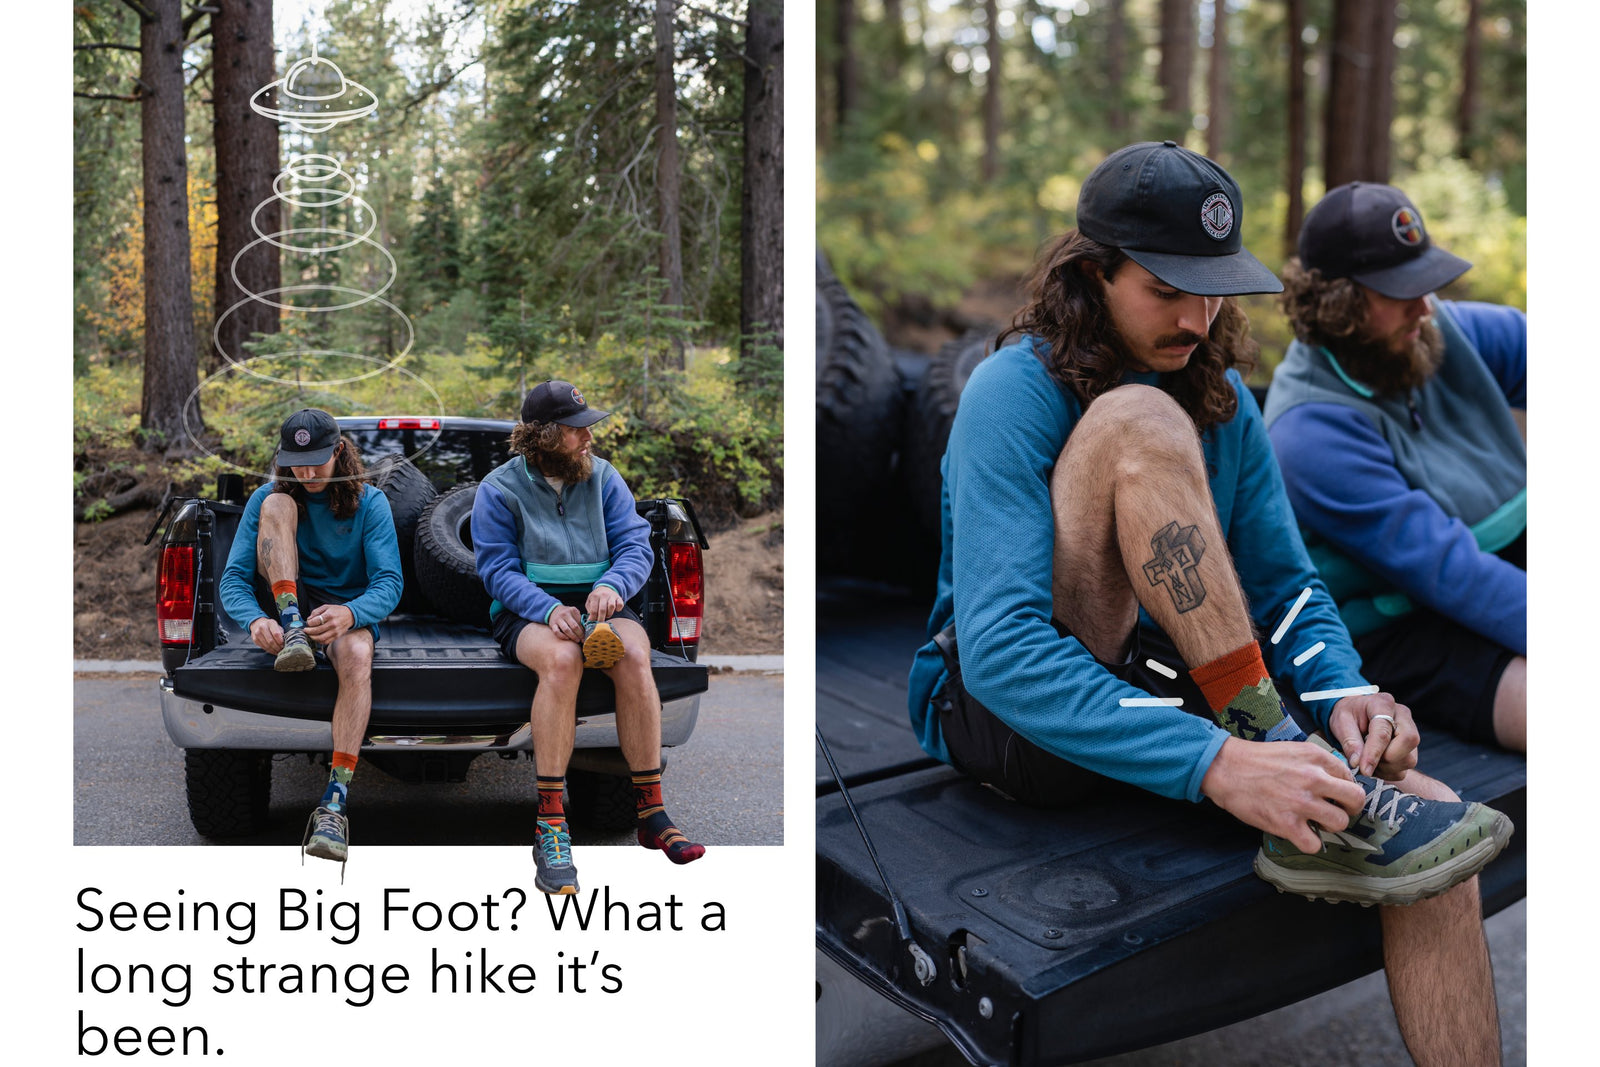 Seeing Big Foot? What a long, strange hike it's been. 